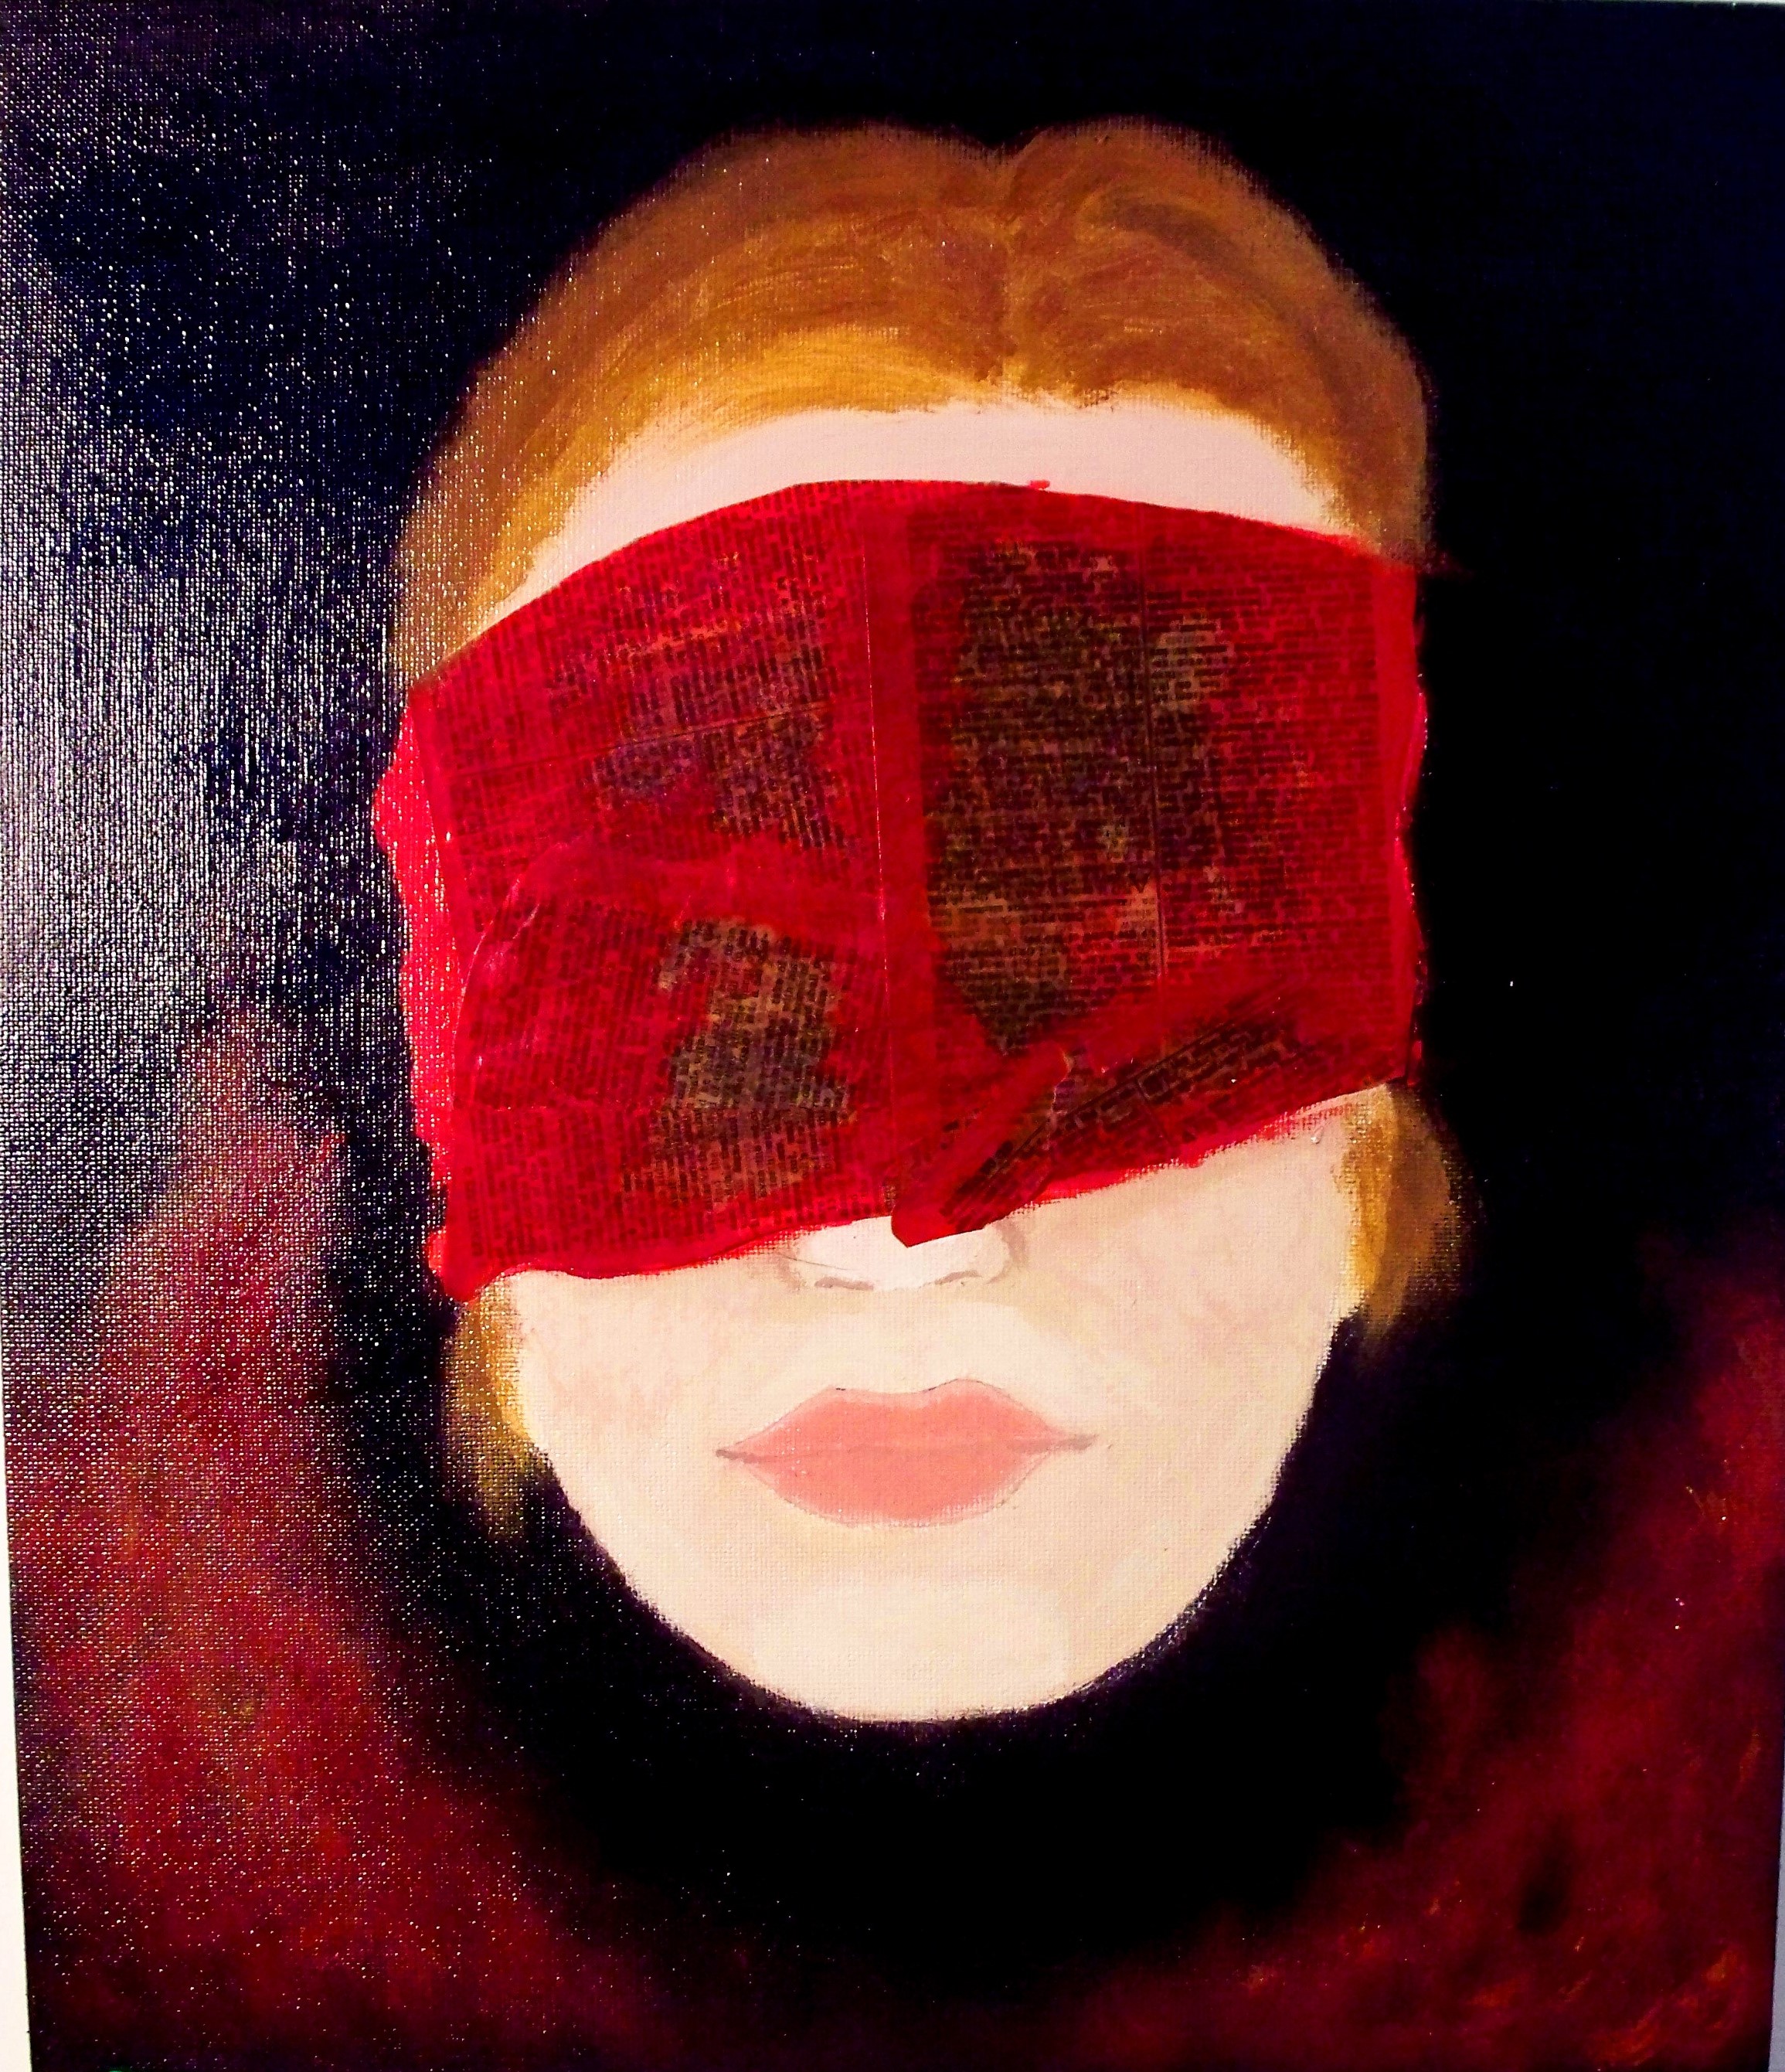 Image of a blind folded woman